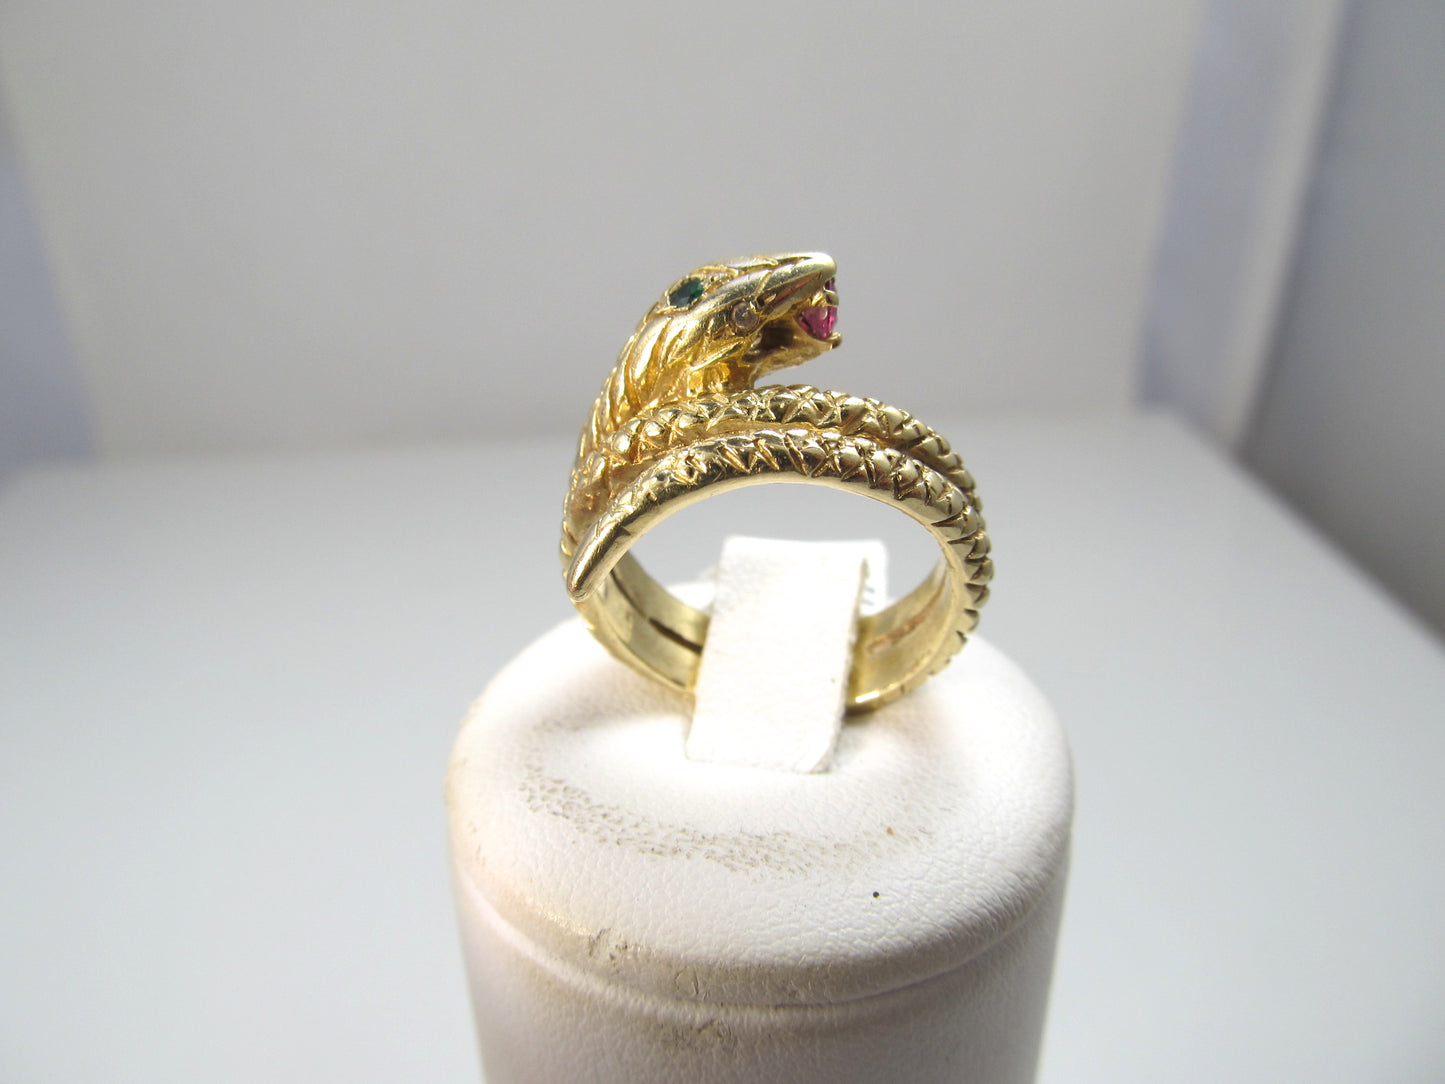 14k coiled snake ring with ruby, emerald and diamonds